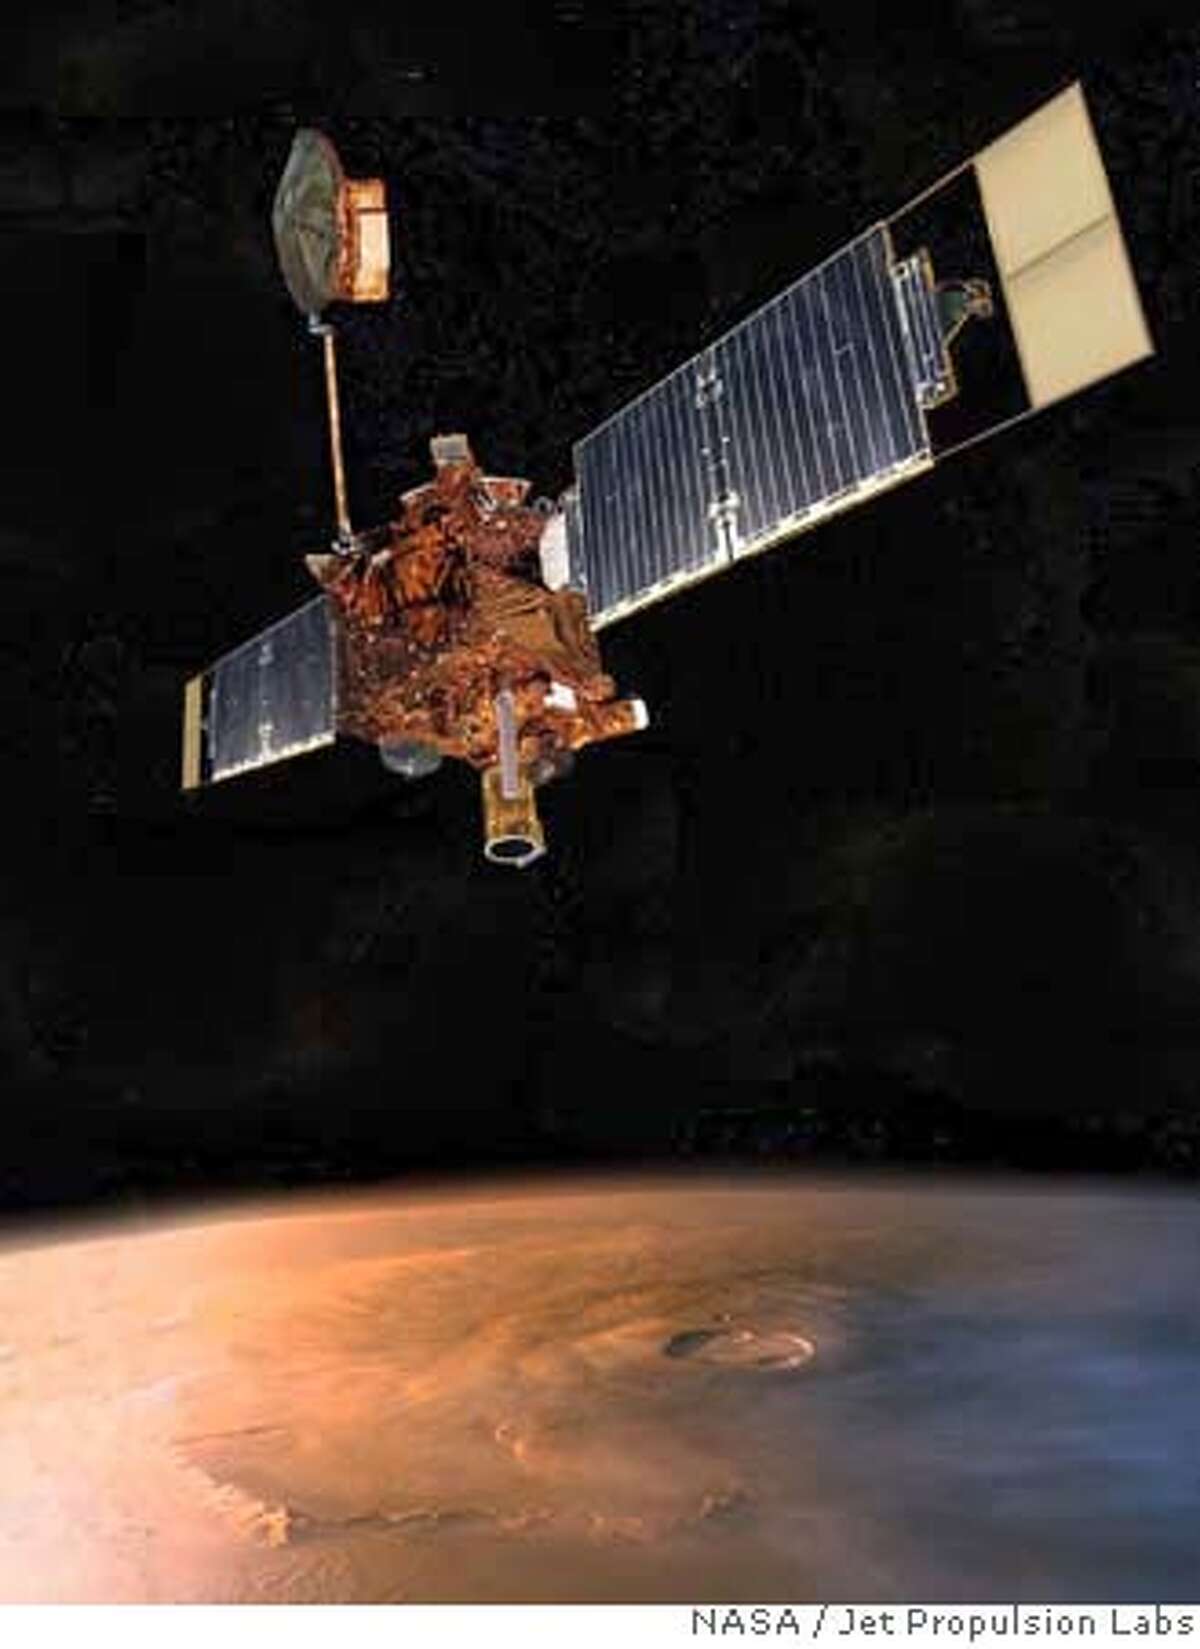 This artist rendering released by NASA's Jet Propulsion Laboratory, shows the Mars Global Surveyor in orbit around Mars. According to a preliminary report released Friday, April 13, 2007, human error triggered a cascade of events that caused the battery to fail on the Mars Global Surveyor last year. An internal NASA board determined that power loss likely doomed the spacecraft after a decade of meticulously mapping the Red Planet. (AP Photo/NASA, Jet Propulsion Labs) ARTIST RENDERING HANDOUT RELEASED BY NASA